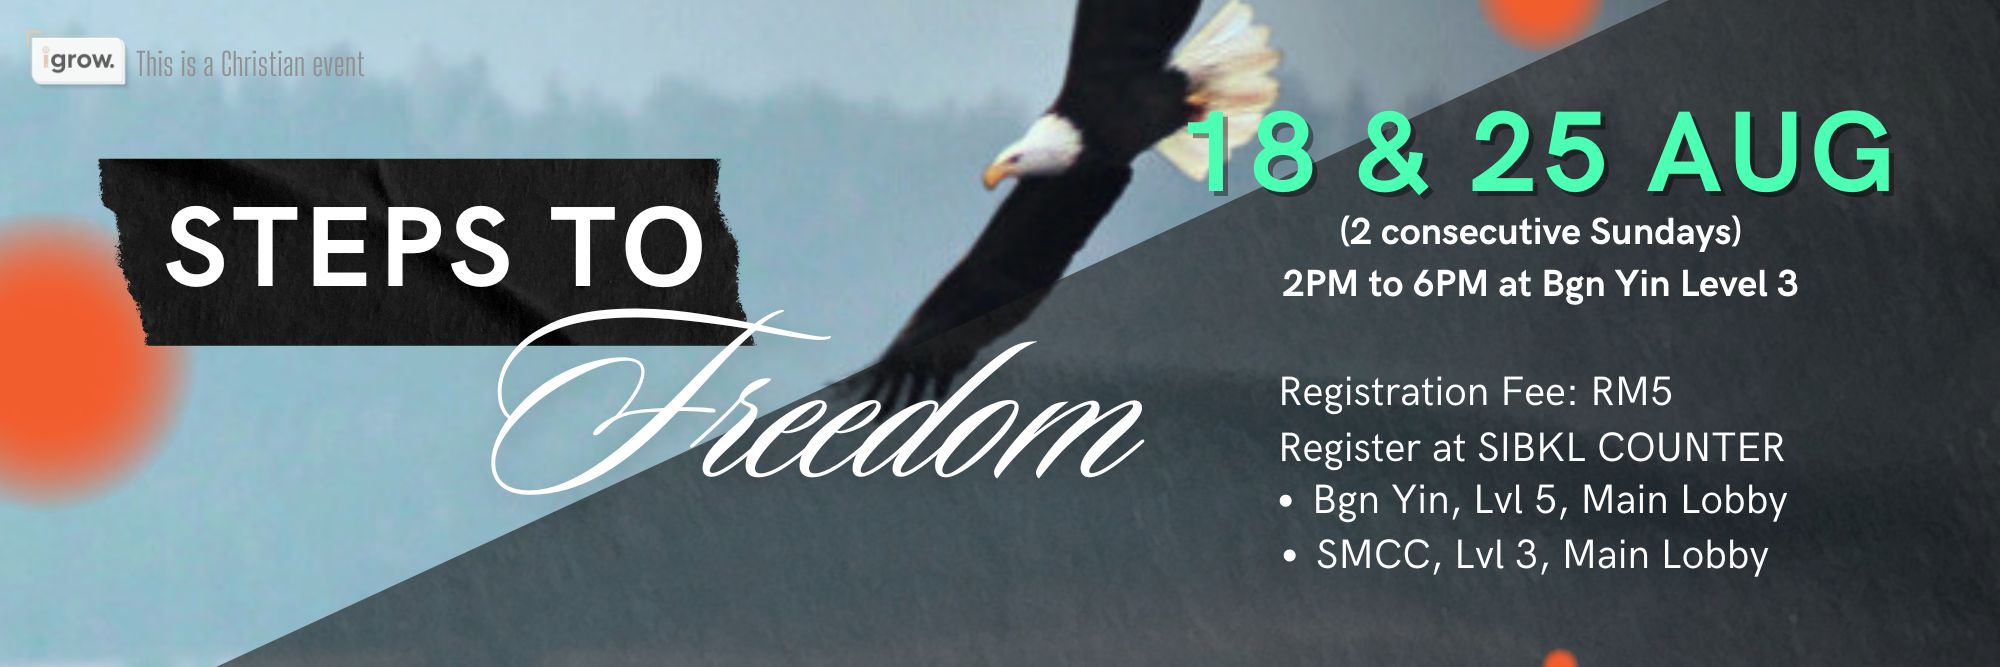 Steps to Freedom Poster (1920 x 1080 px) (2000 x 667 px)